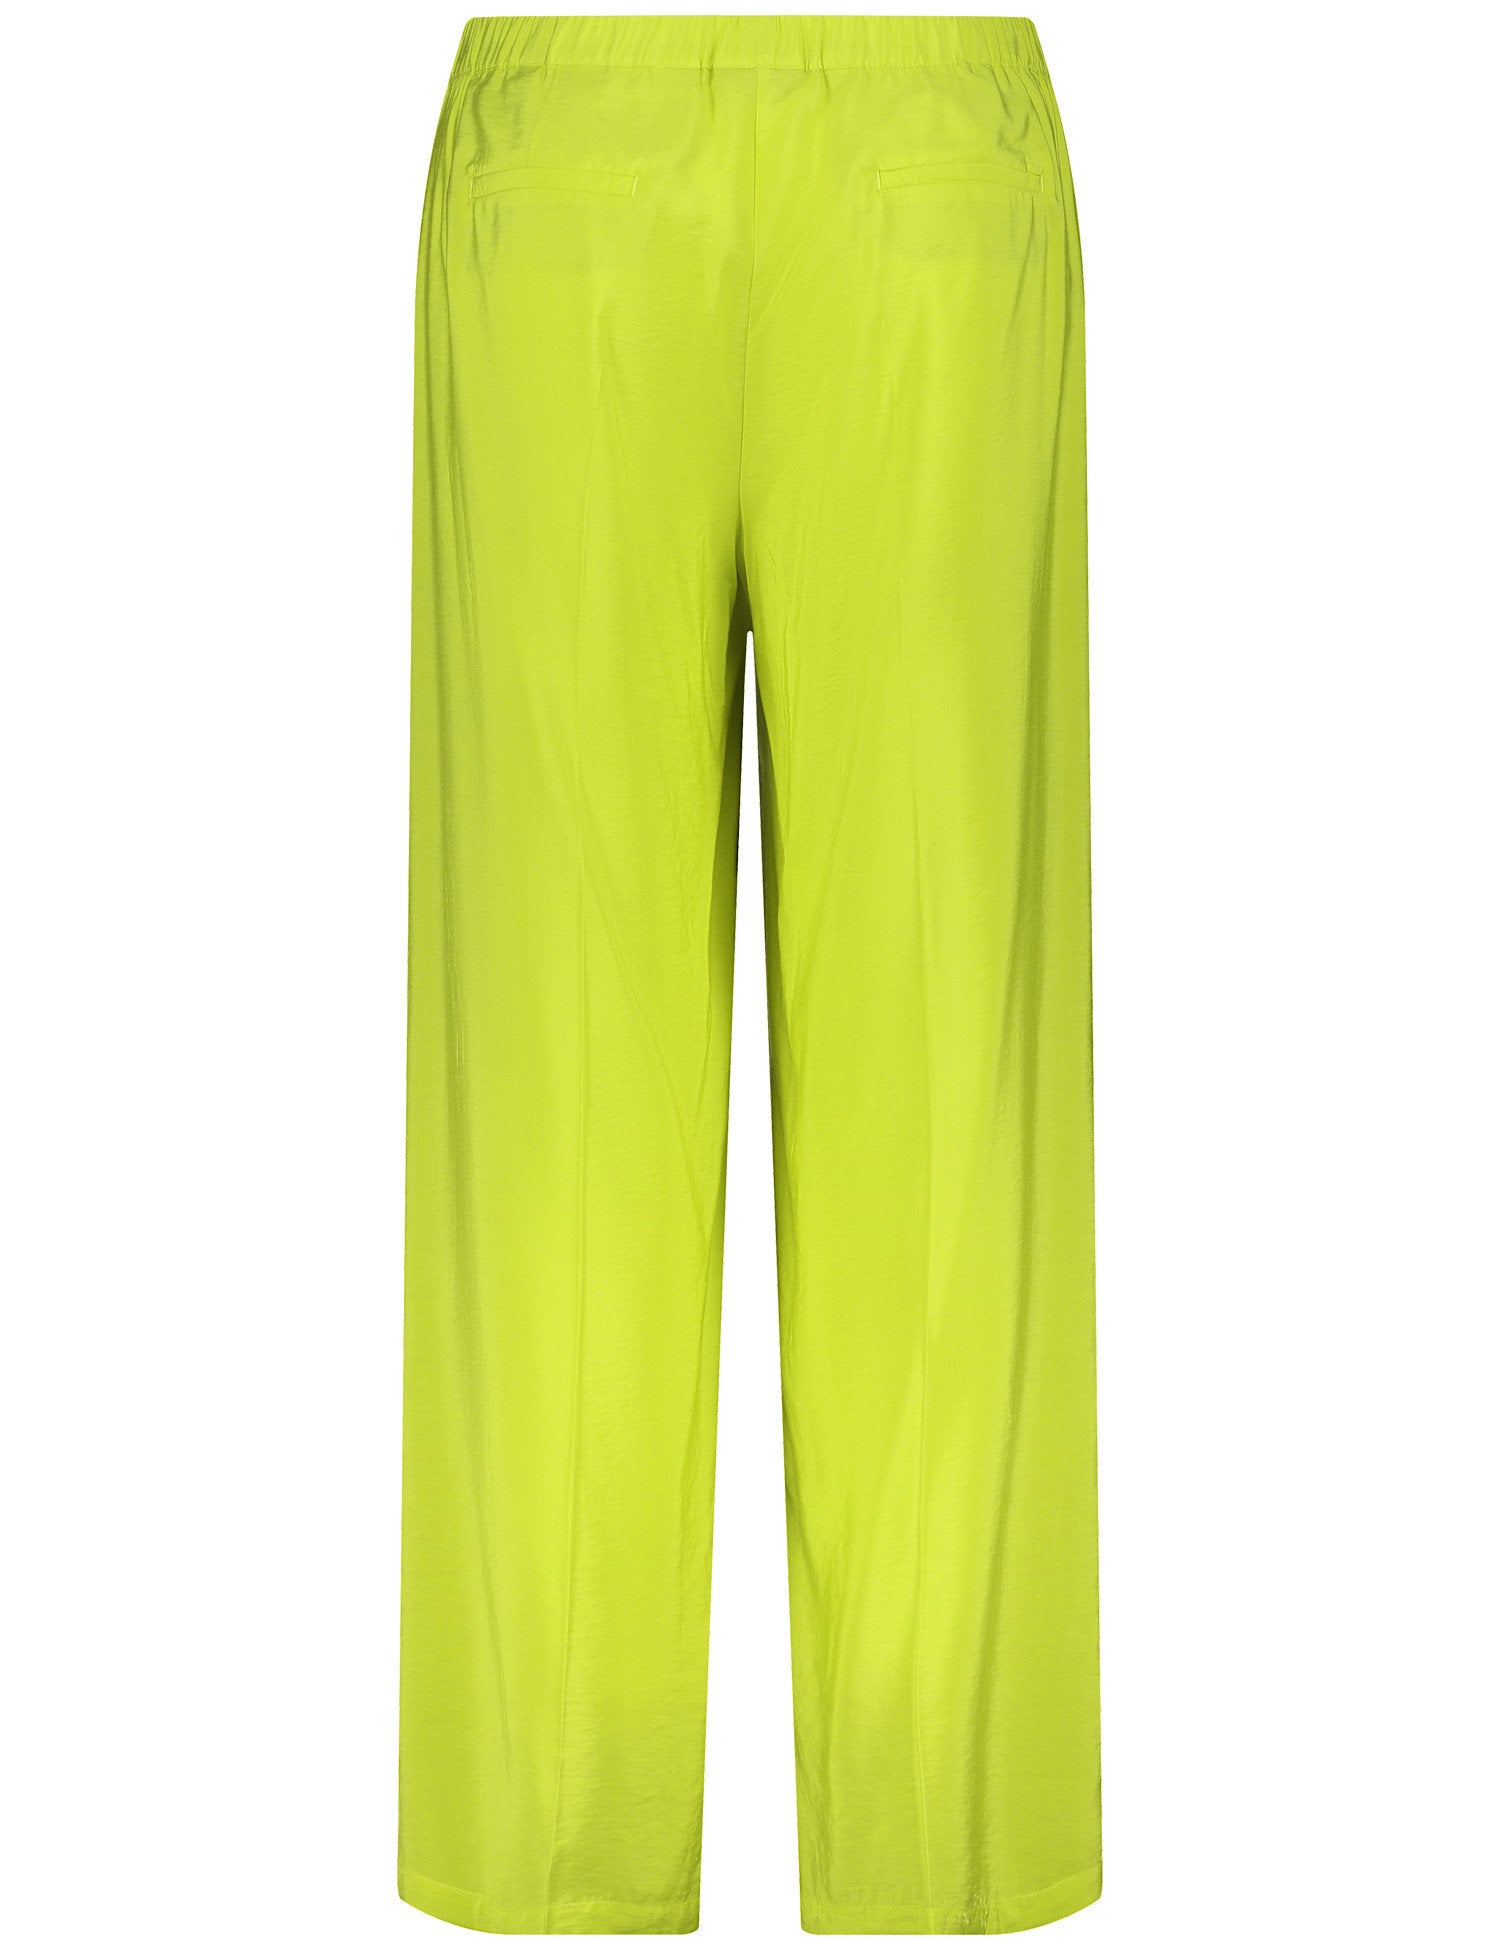 Wide Trousers With A Subtle Shimmer_420031-21052_5600_08